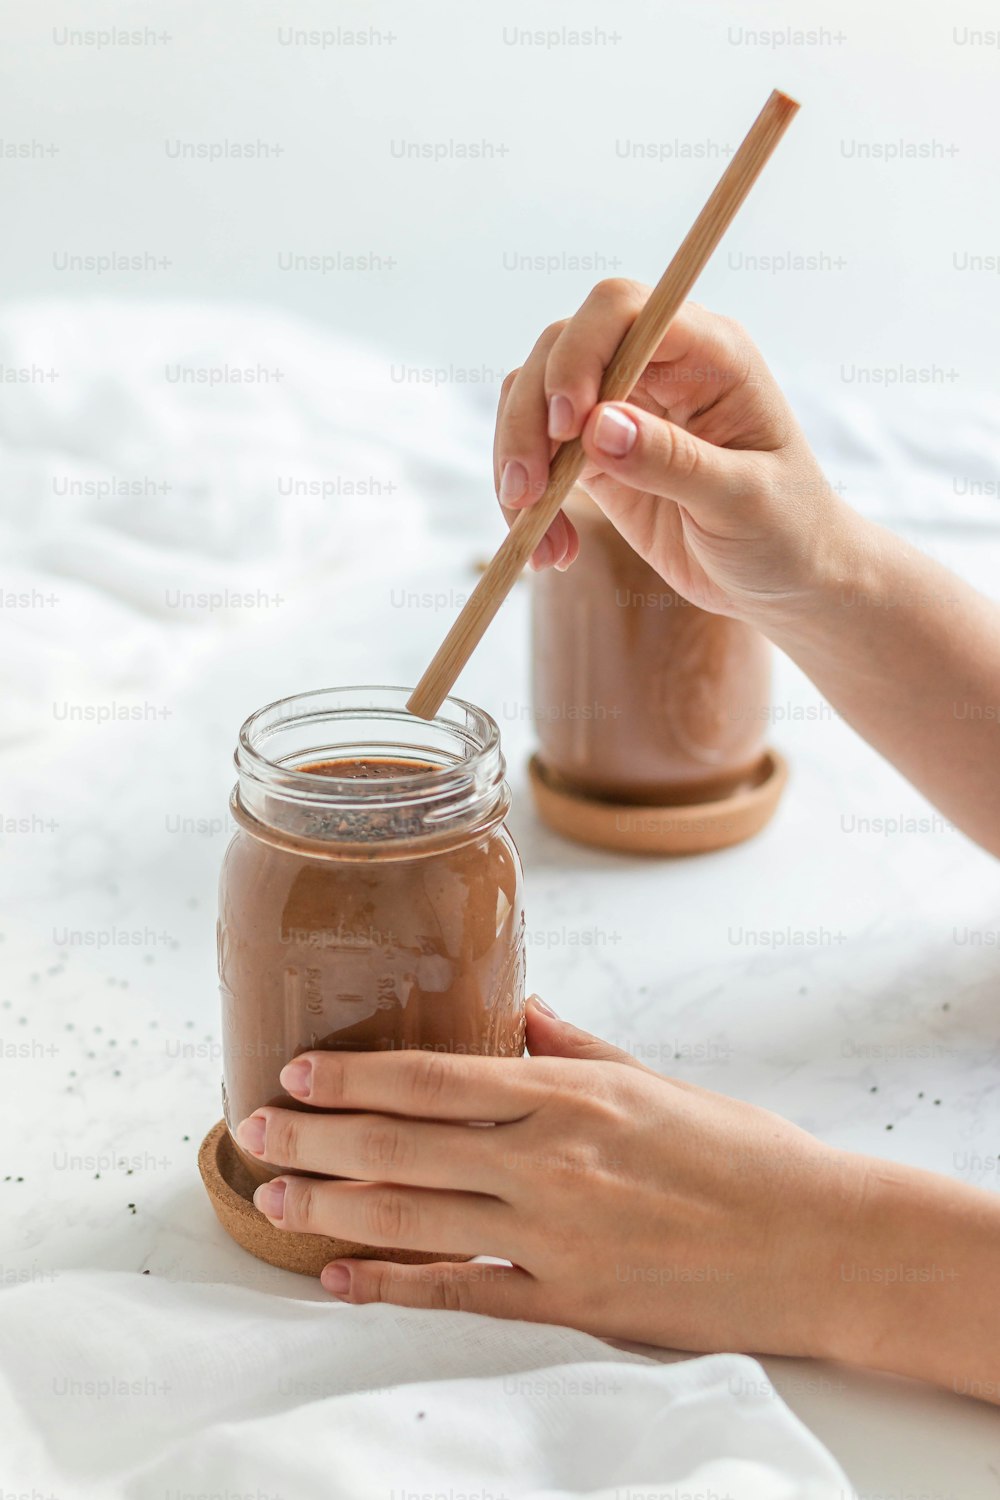 a person holding a wooden spoon over a jar of chocolate